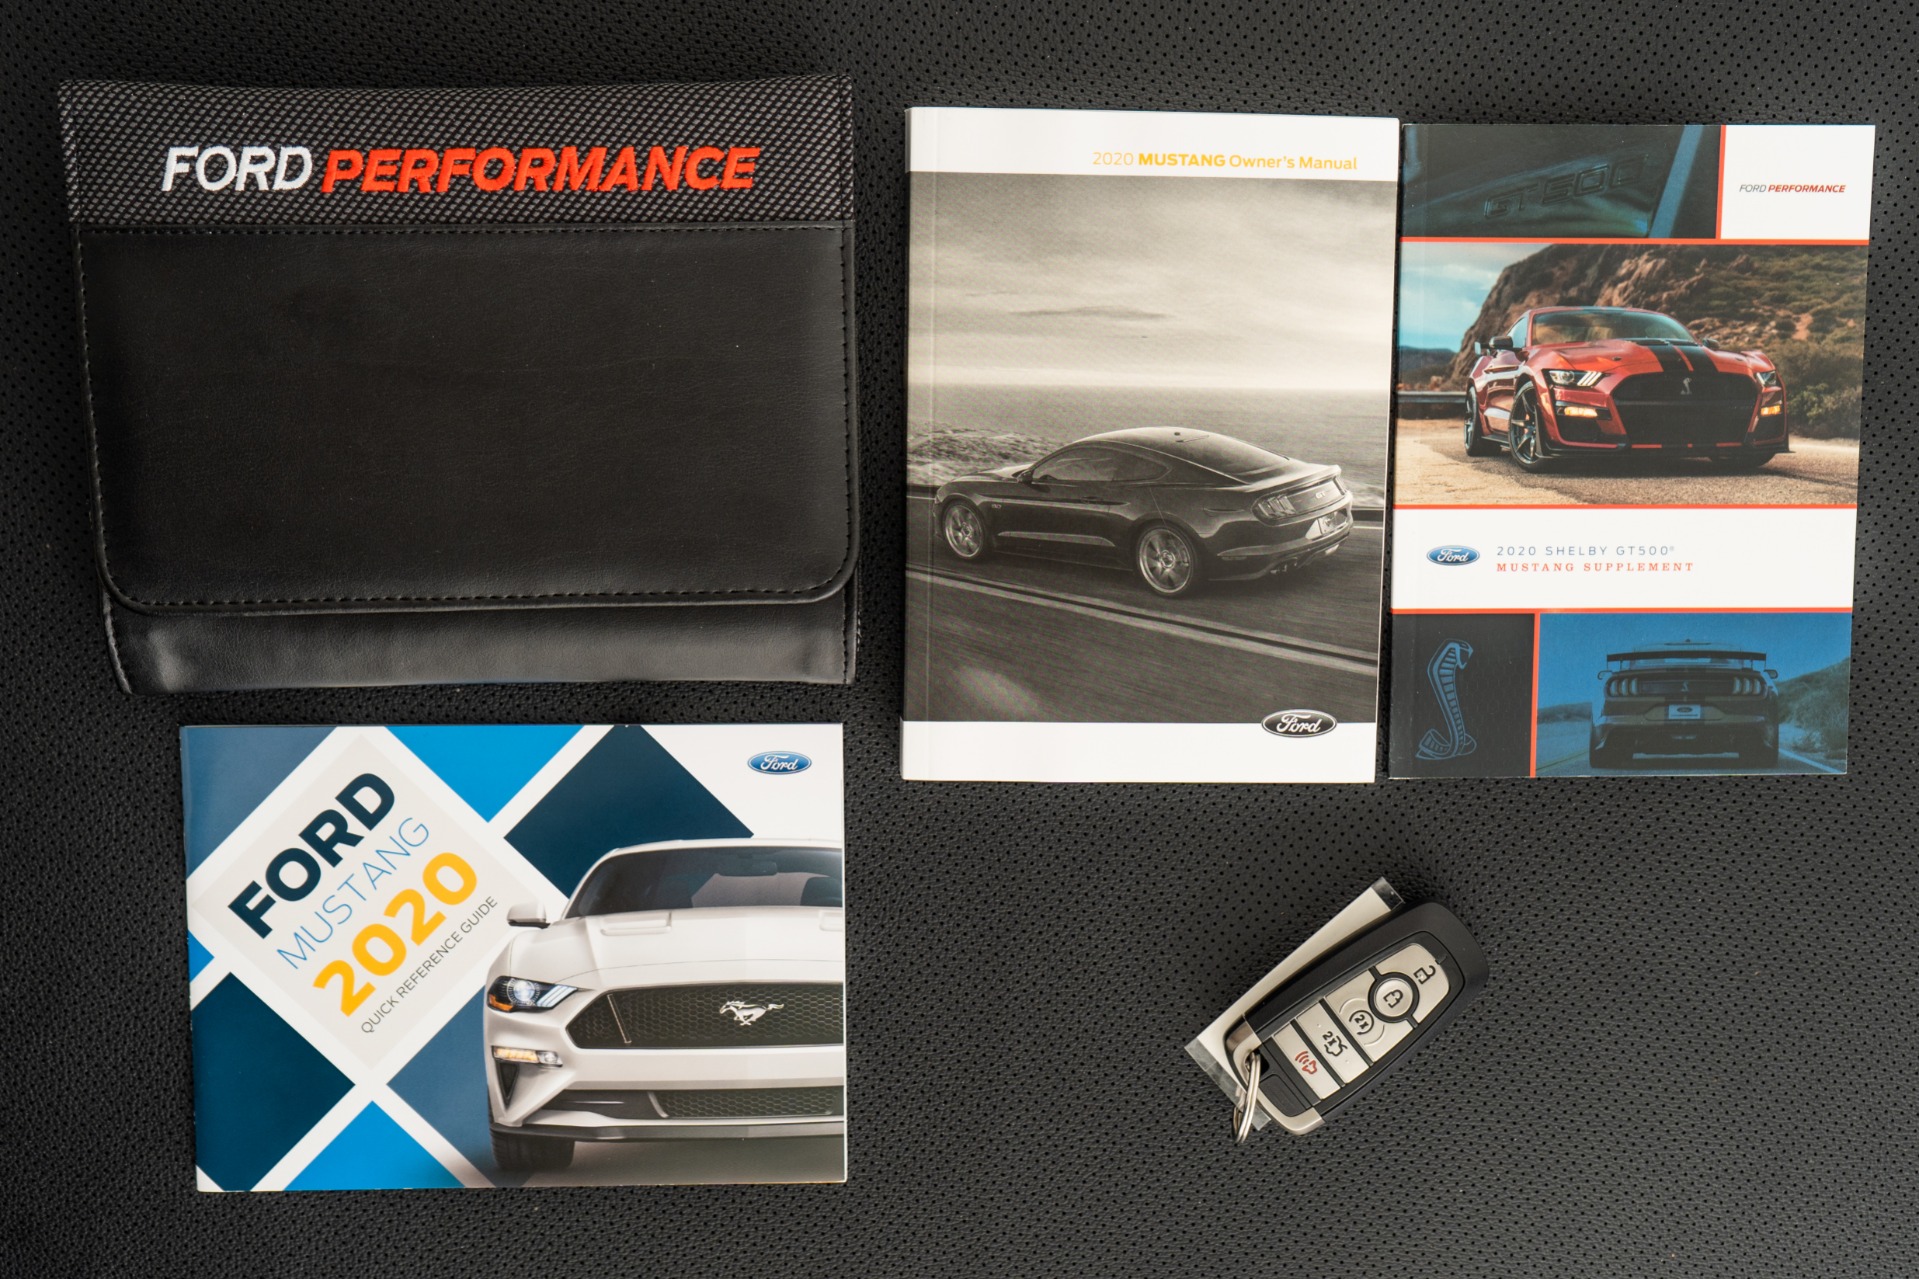 Video: Shelby GT350 Owner's Supplement Unboxing